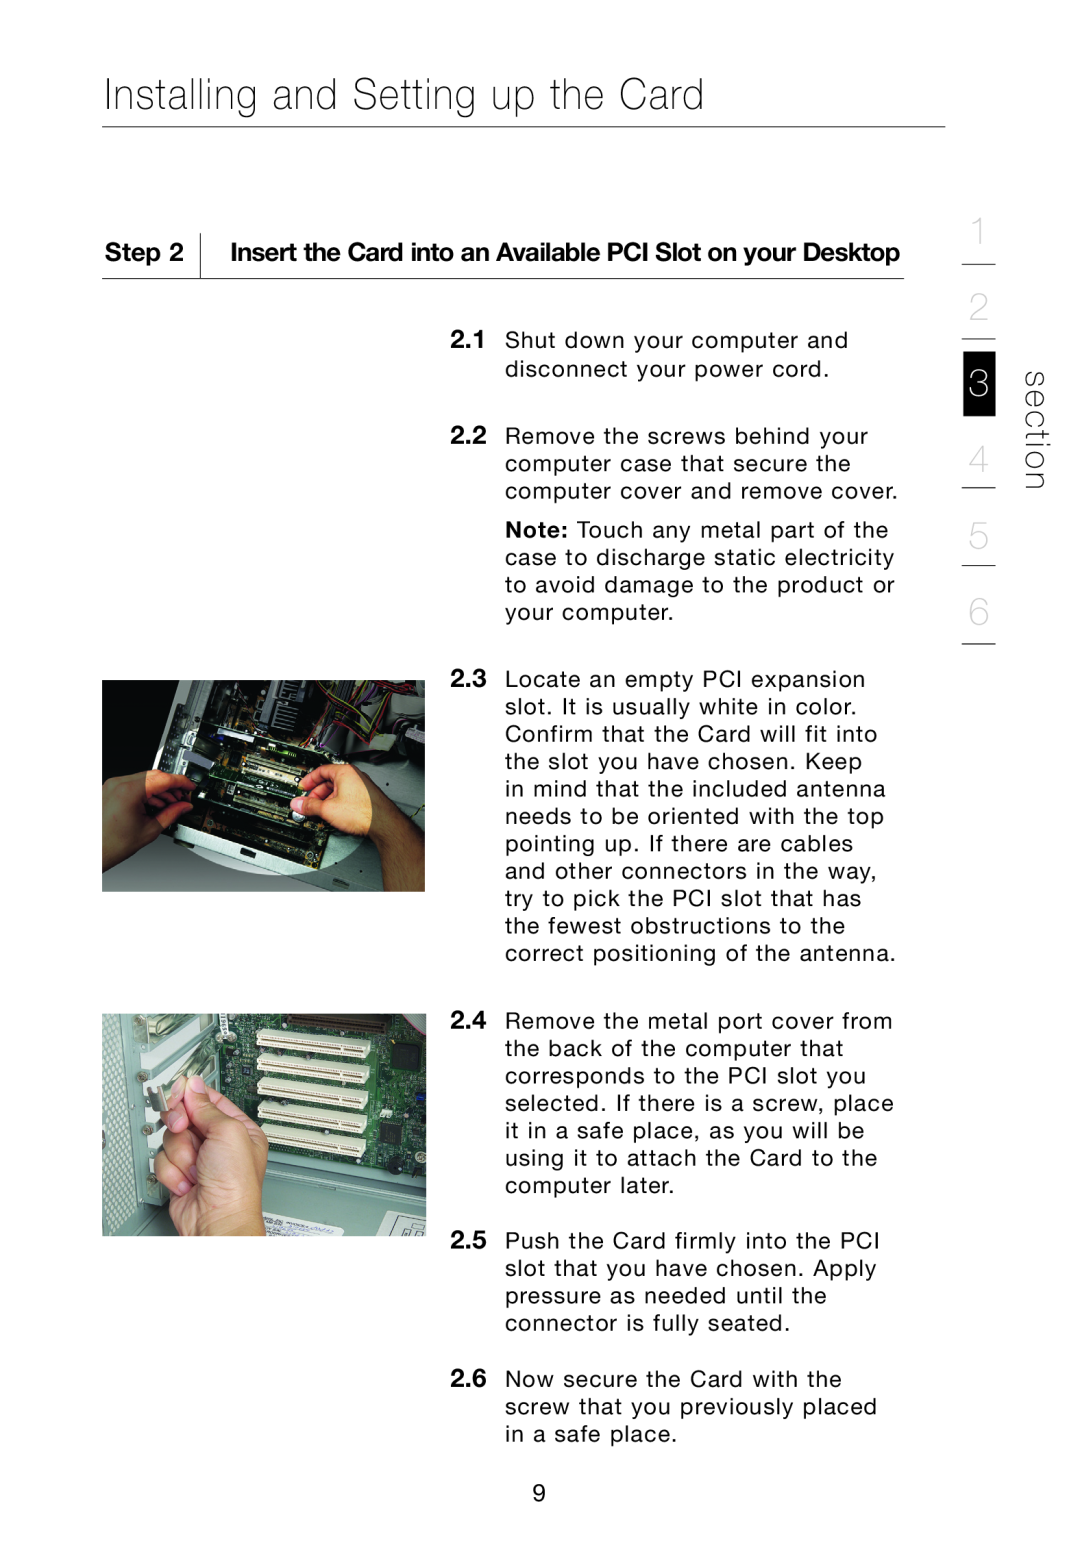 Verizon VZ4000 Insert the Card into an Available PCI Slot on your Desktop, Installing and Setting up the Card, section 